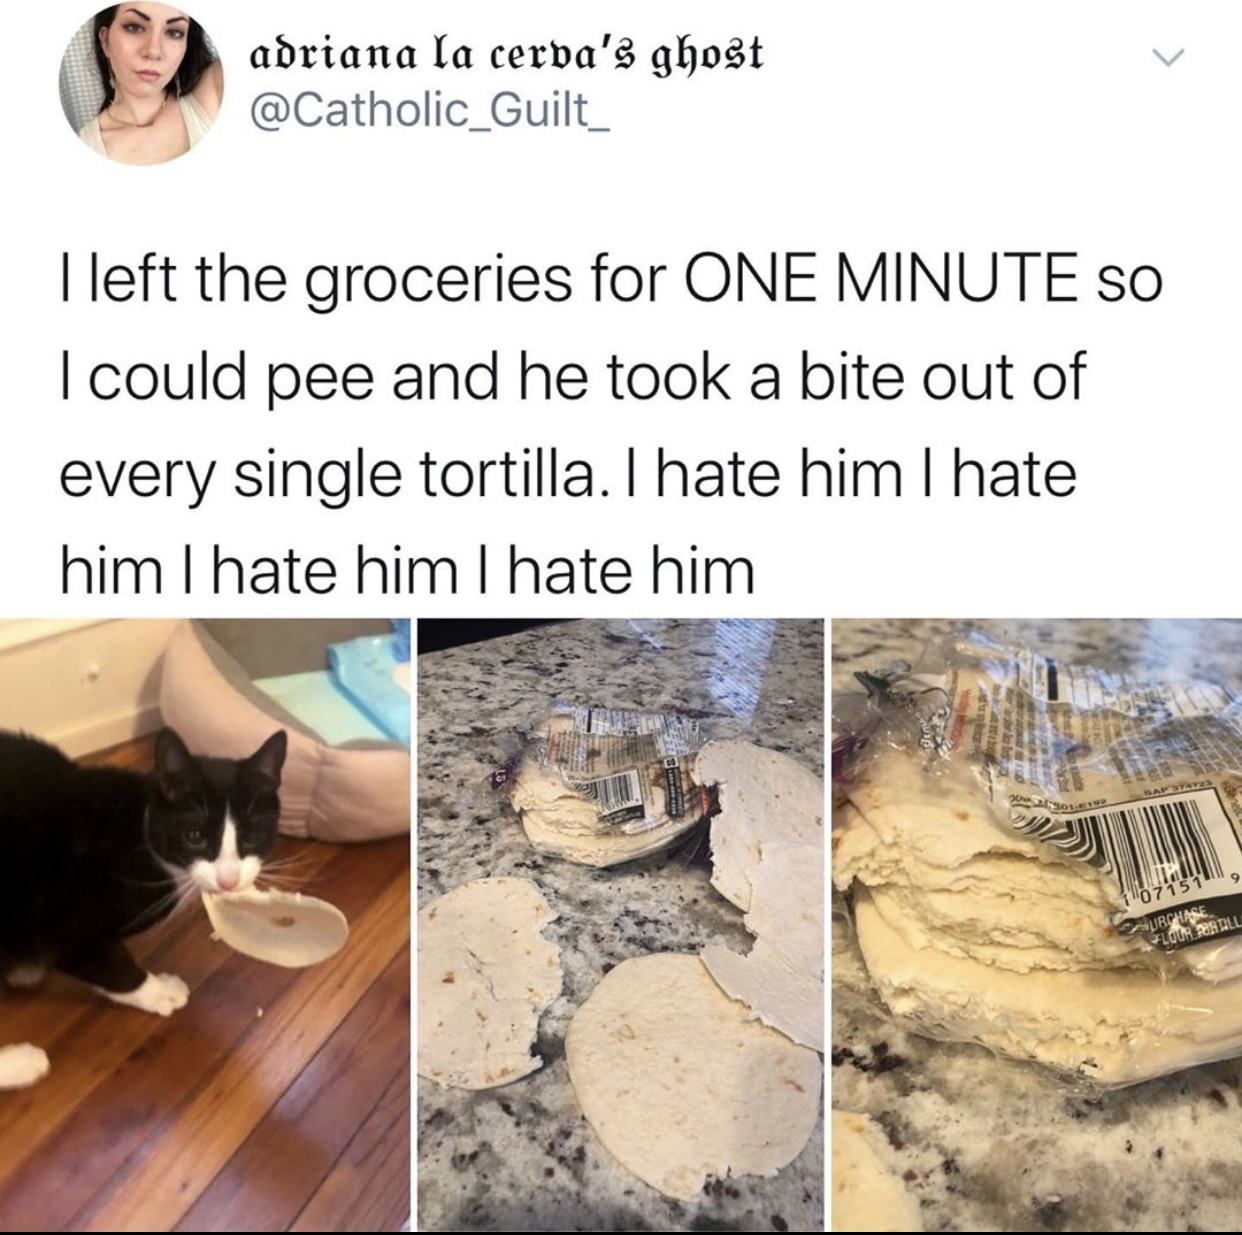 meme - water - adriana la cerva's ghost I left the groceries for One Minute So I could pee and he took a bite out of every single tortilla. I hate him I hate him Thate him I hate him 10 715 Erall